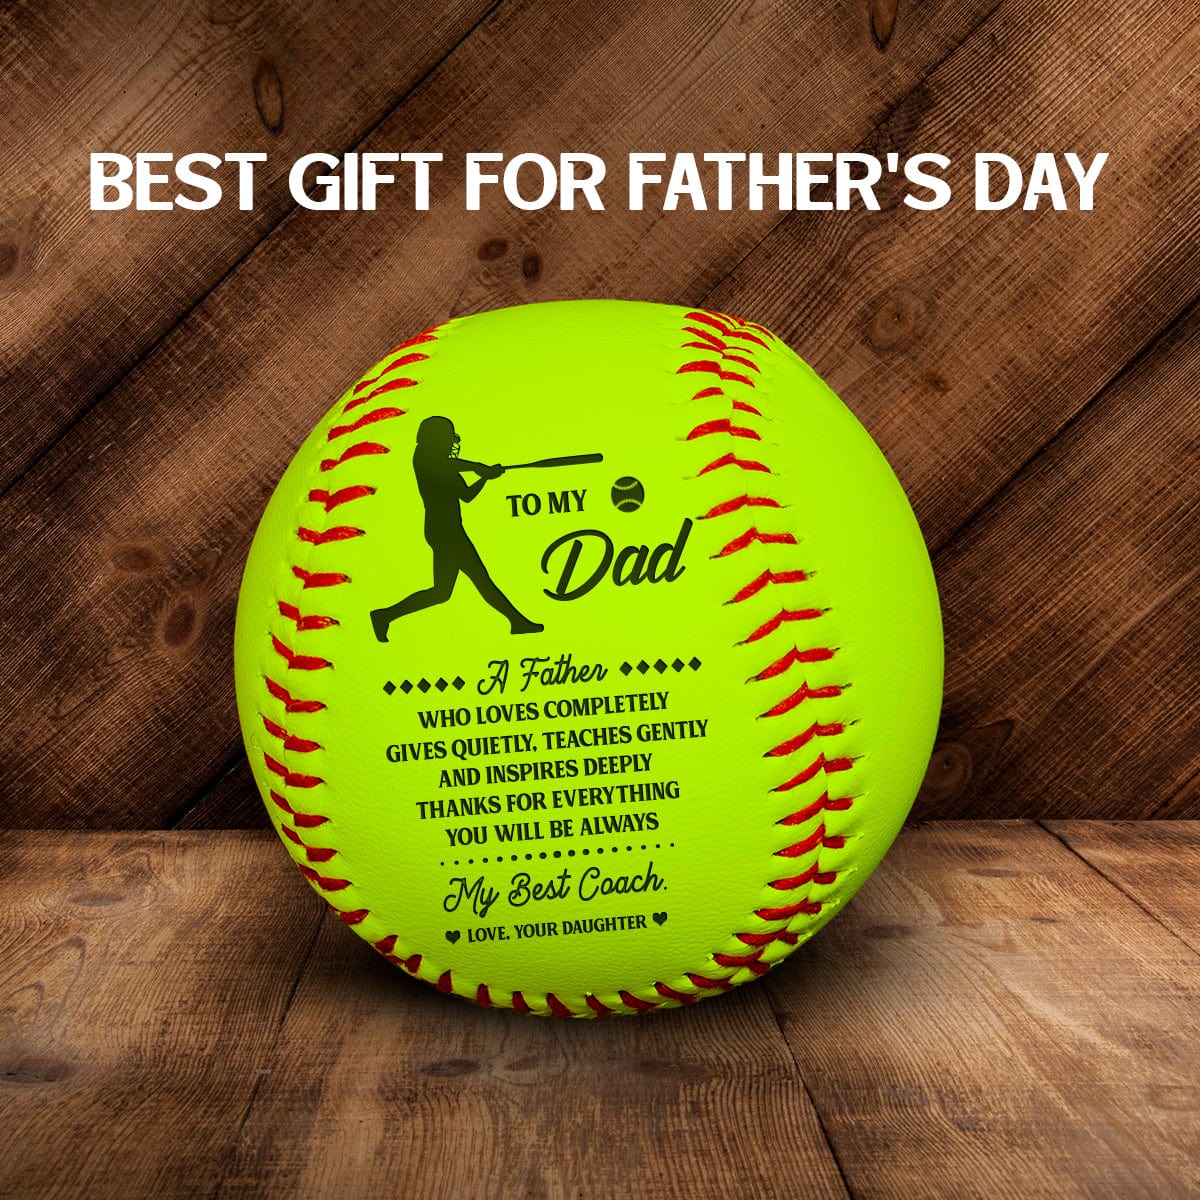 Blinn Softball on X: We want to wish a very Happy Father's Day to